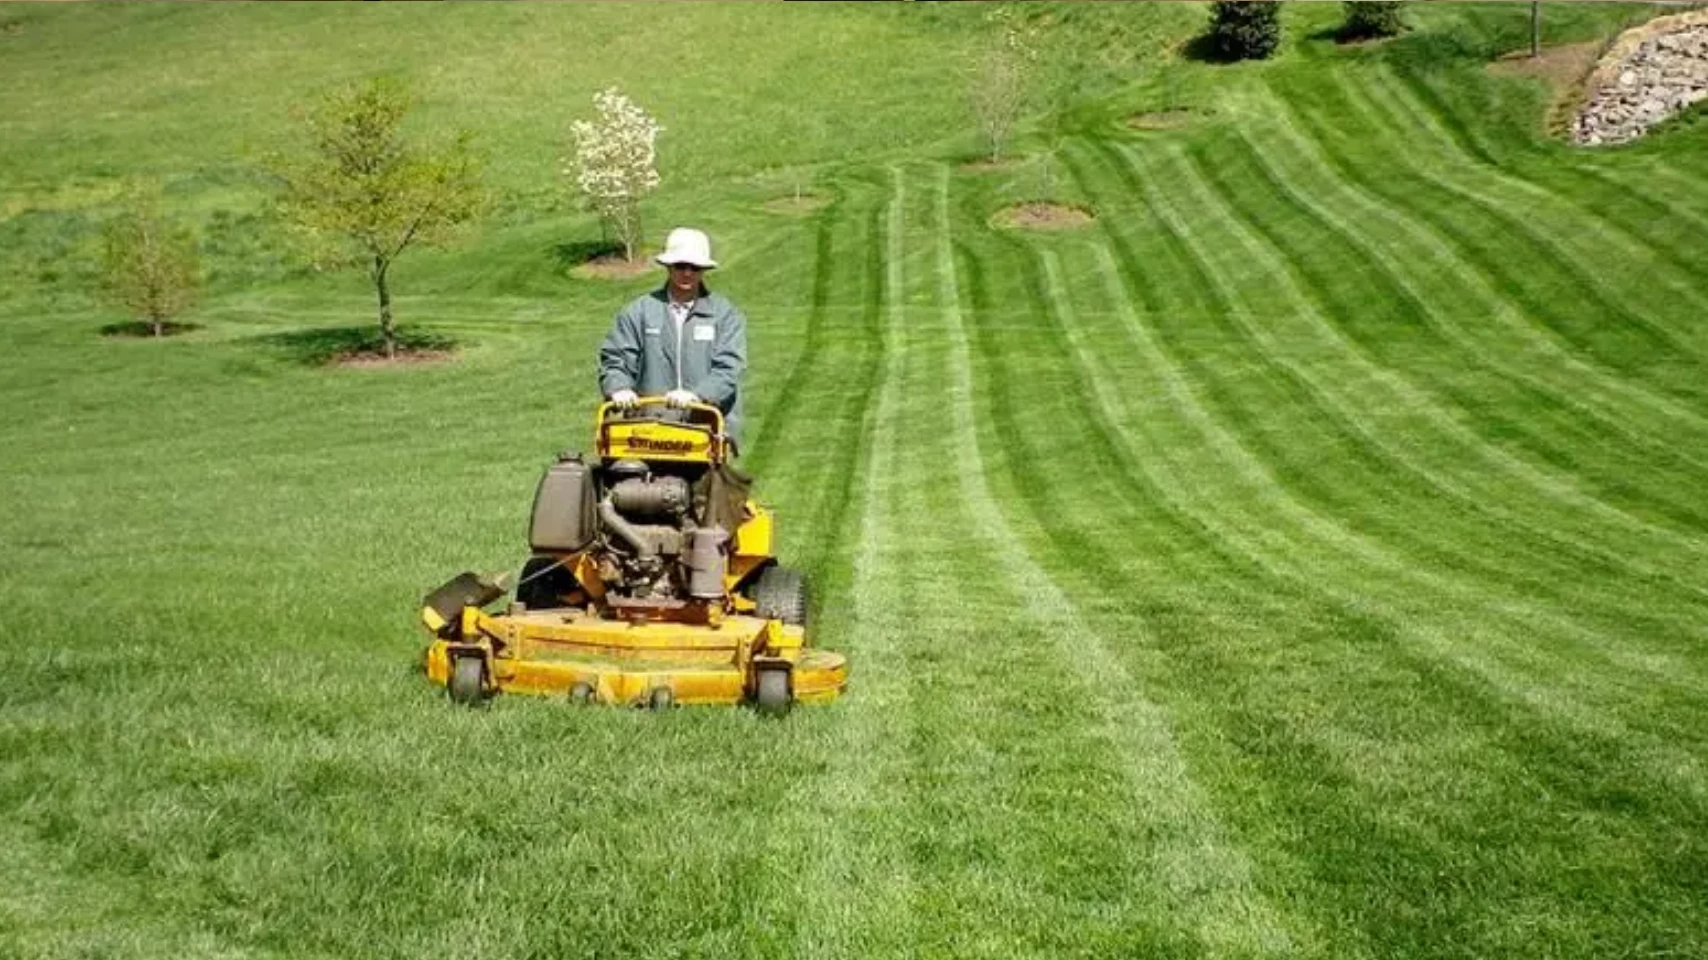 Landscape Maintenance Consistent Mowing and Blowing